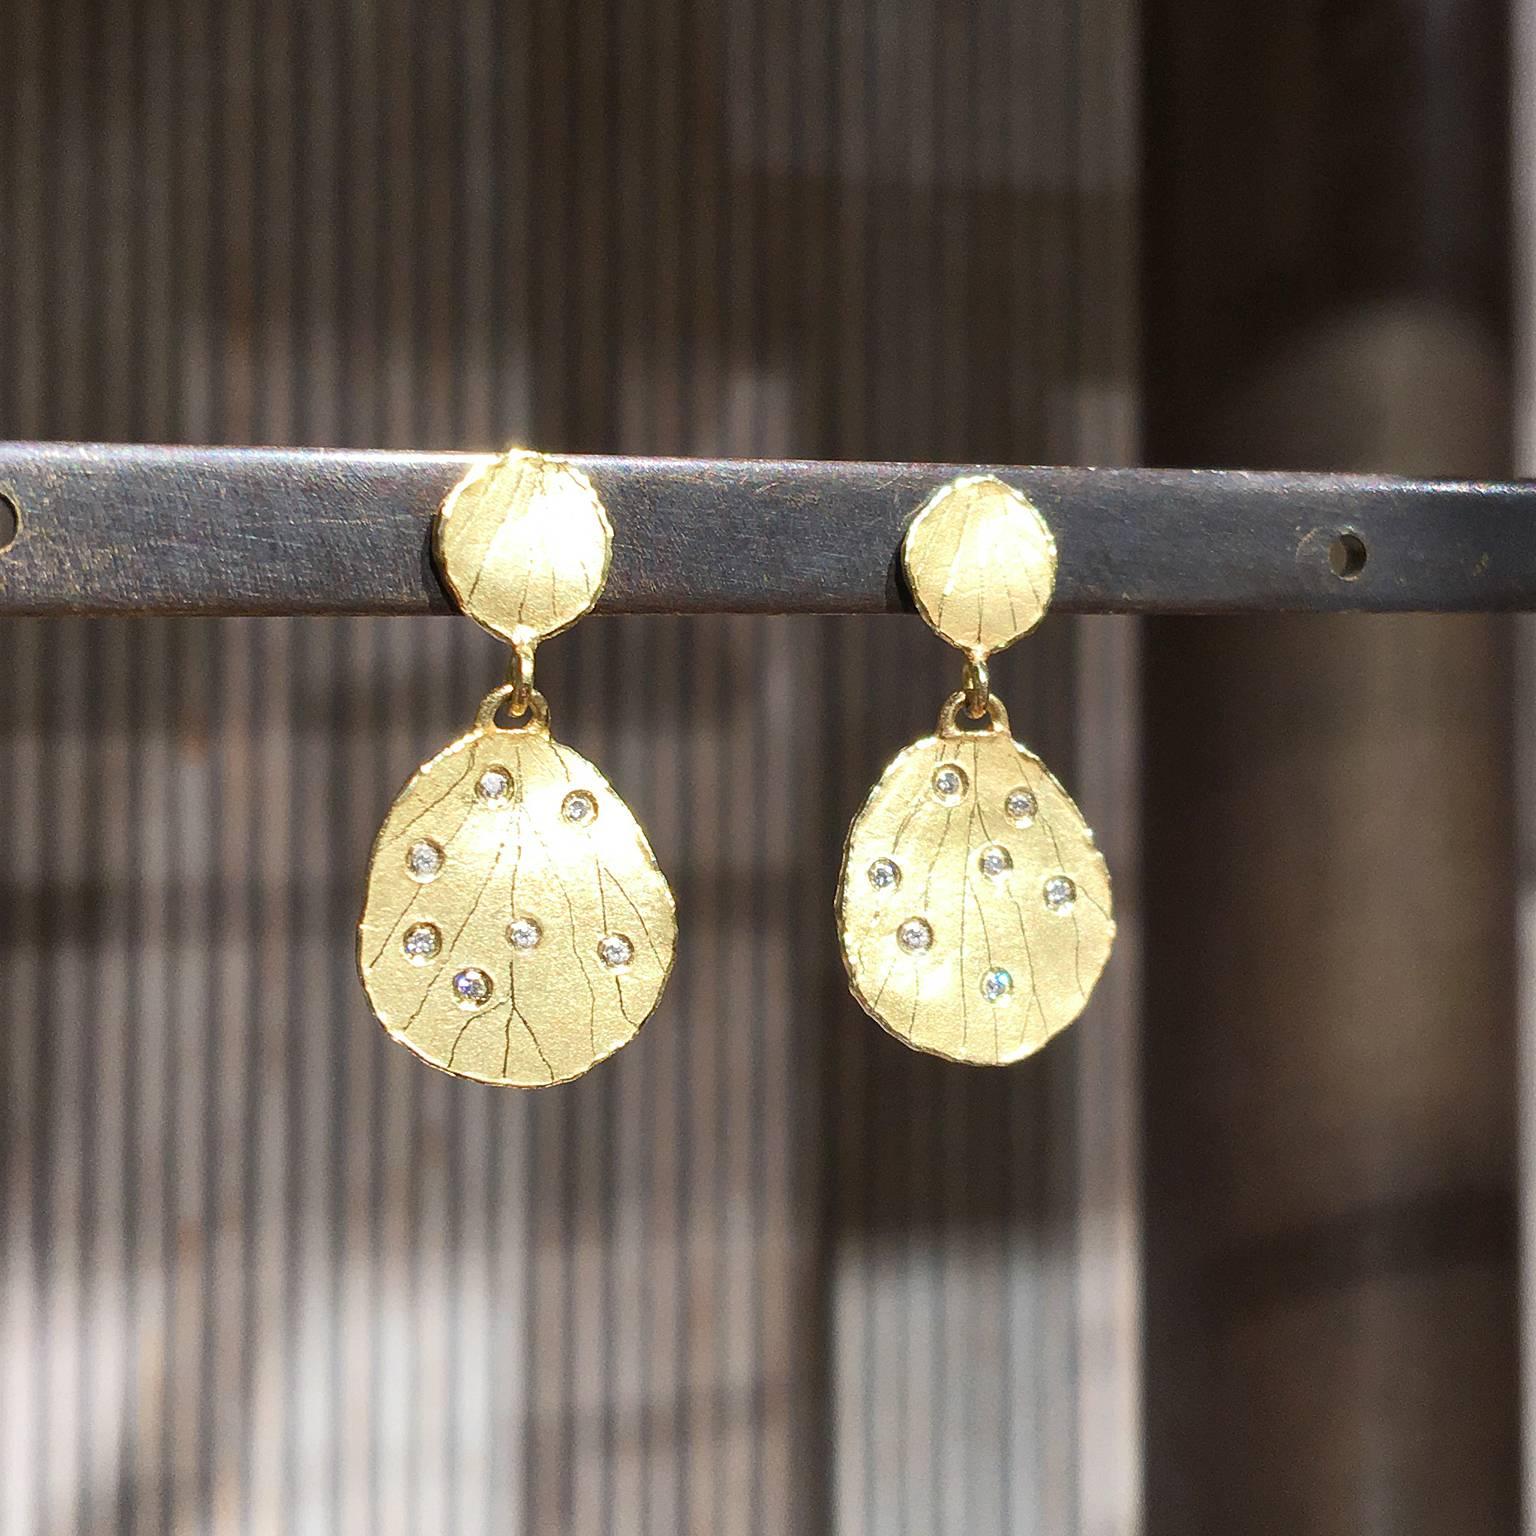 Petal Dangle Drop Earrings handcrafted in matte-finished 18k yellow gold by award-winning jewelry artist Barbara Heinrich with etched petal tops above dangling petal drops embedded with  fourteen 0.005 carat round brilliant-cut white diamonds